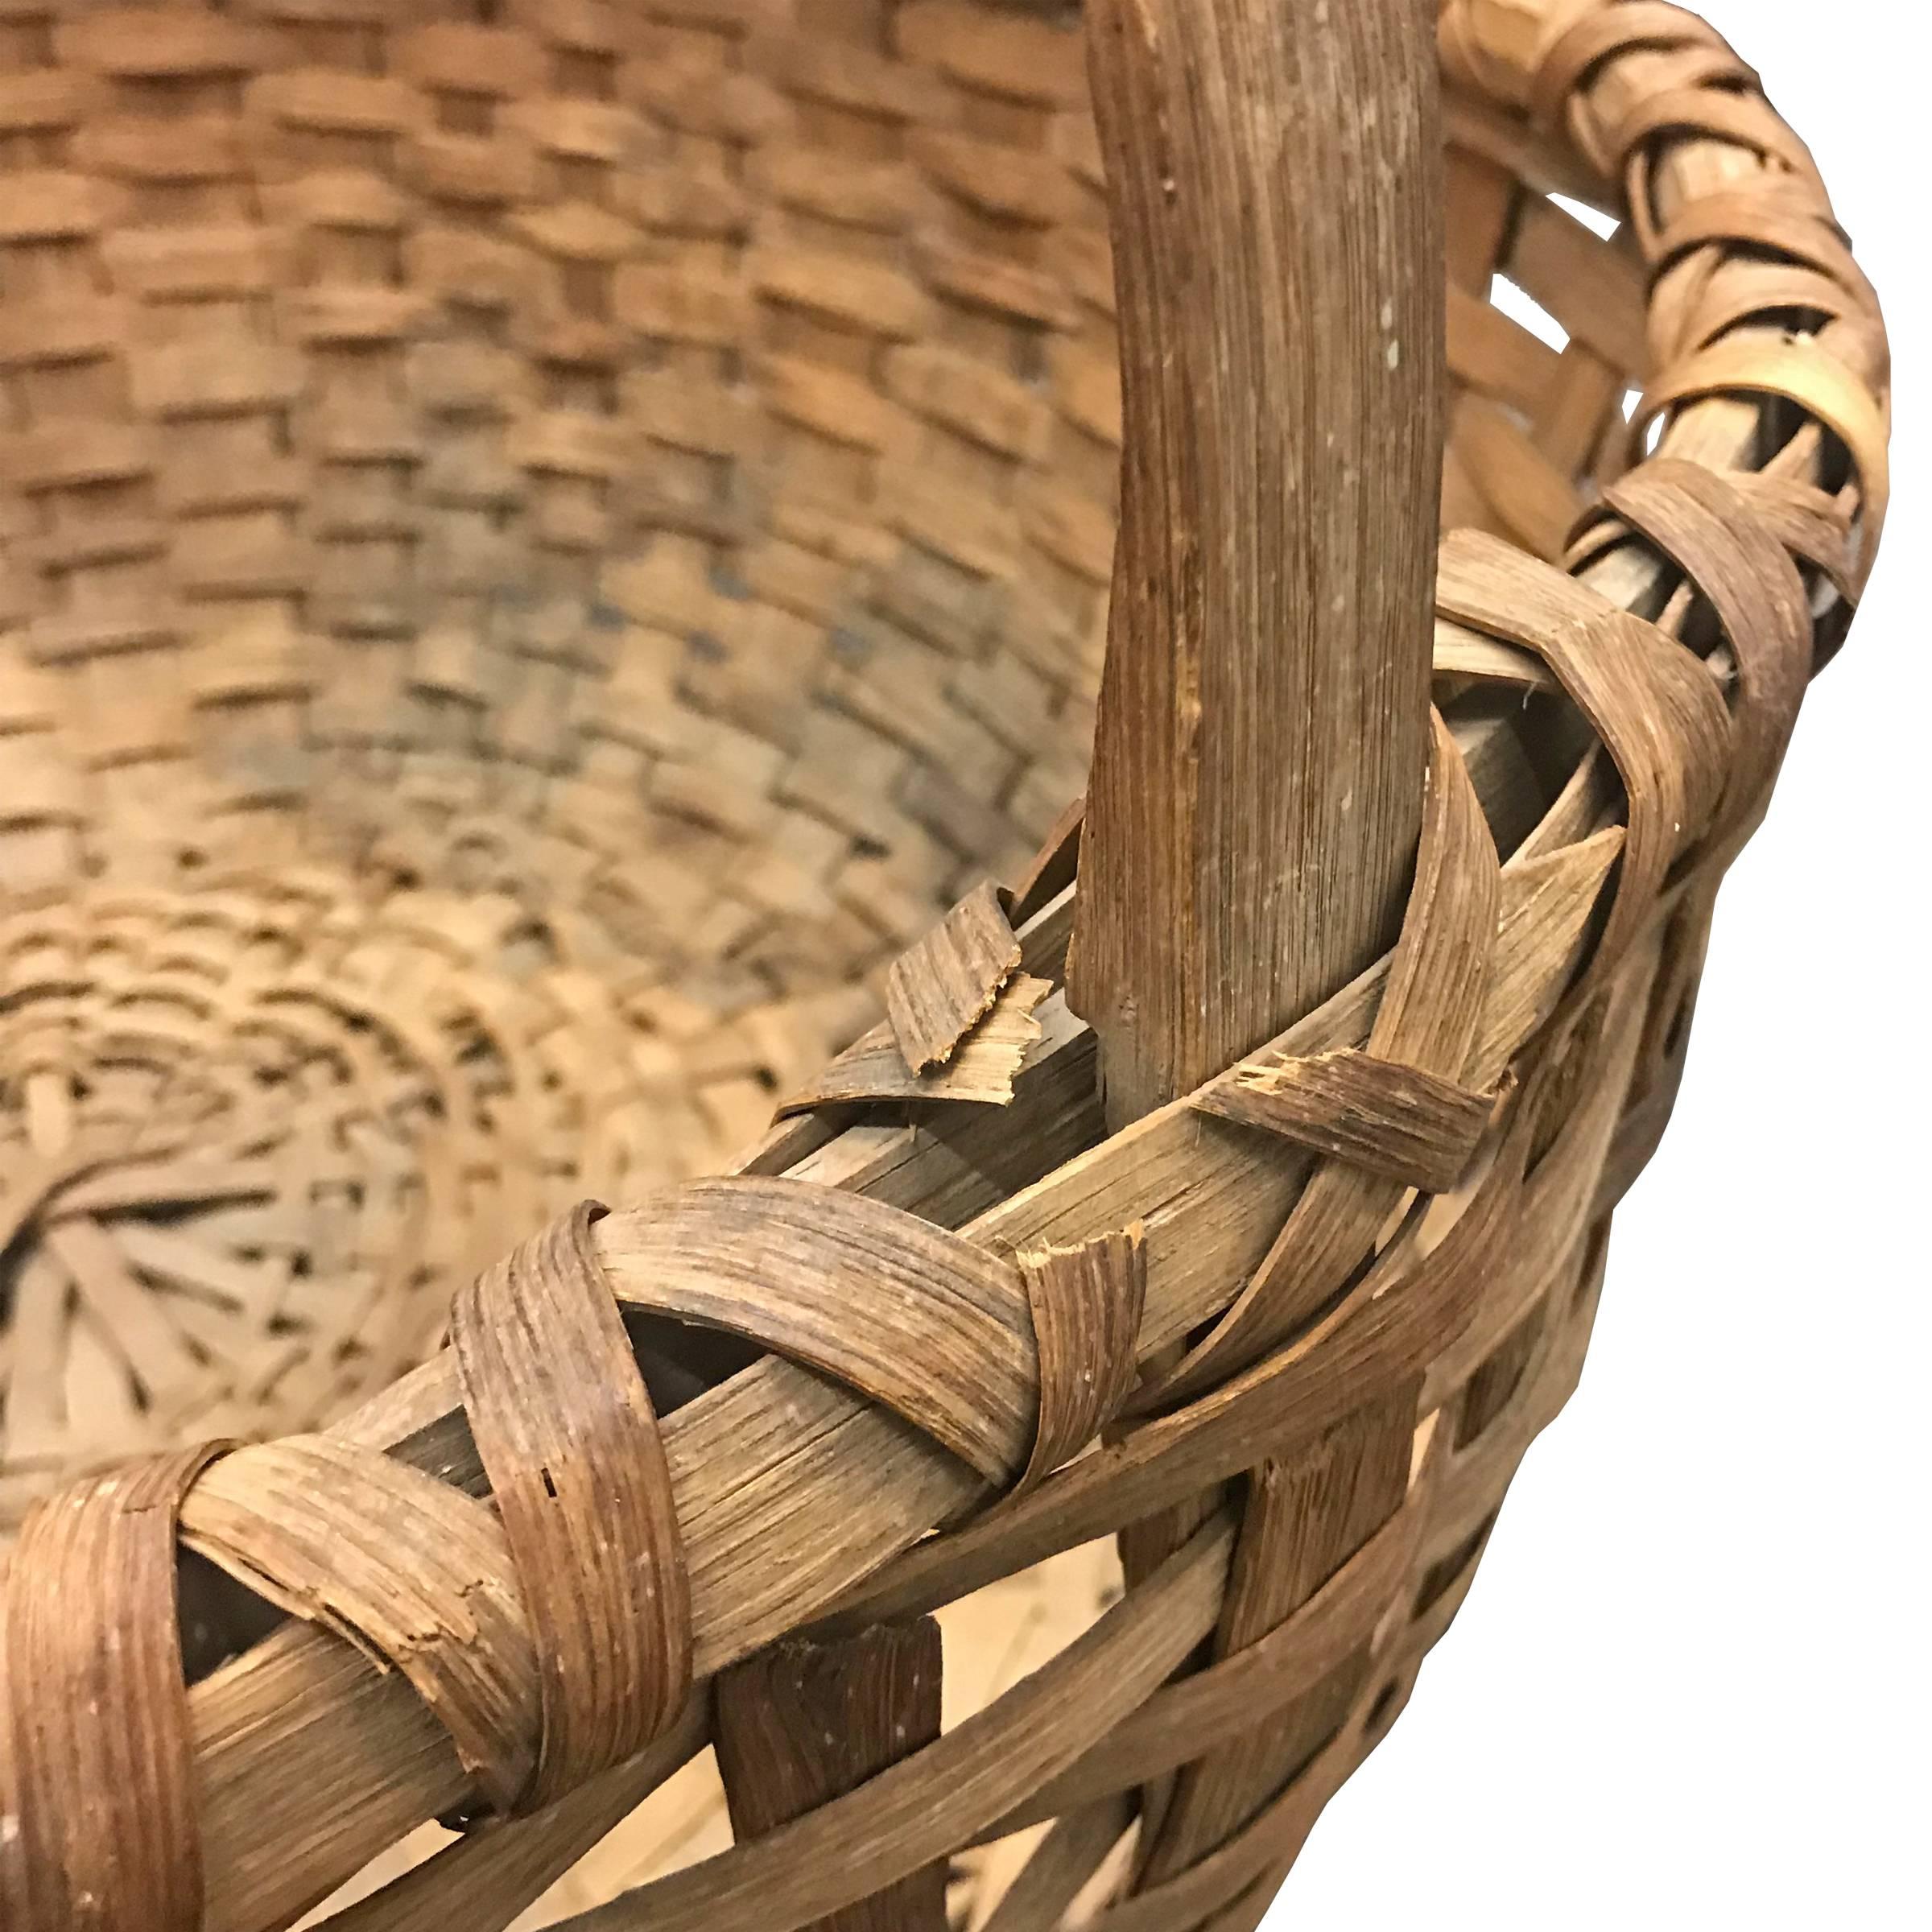 19th Century American Splint Oak Gathering Basket In Good Condition For Sale In Chicago, IL